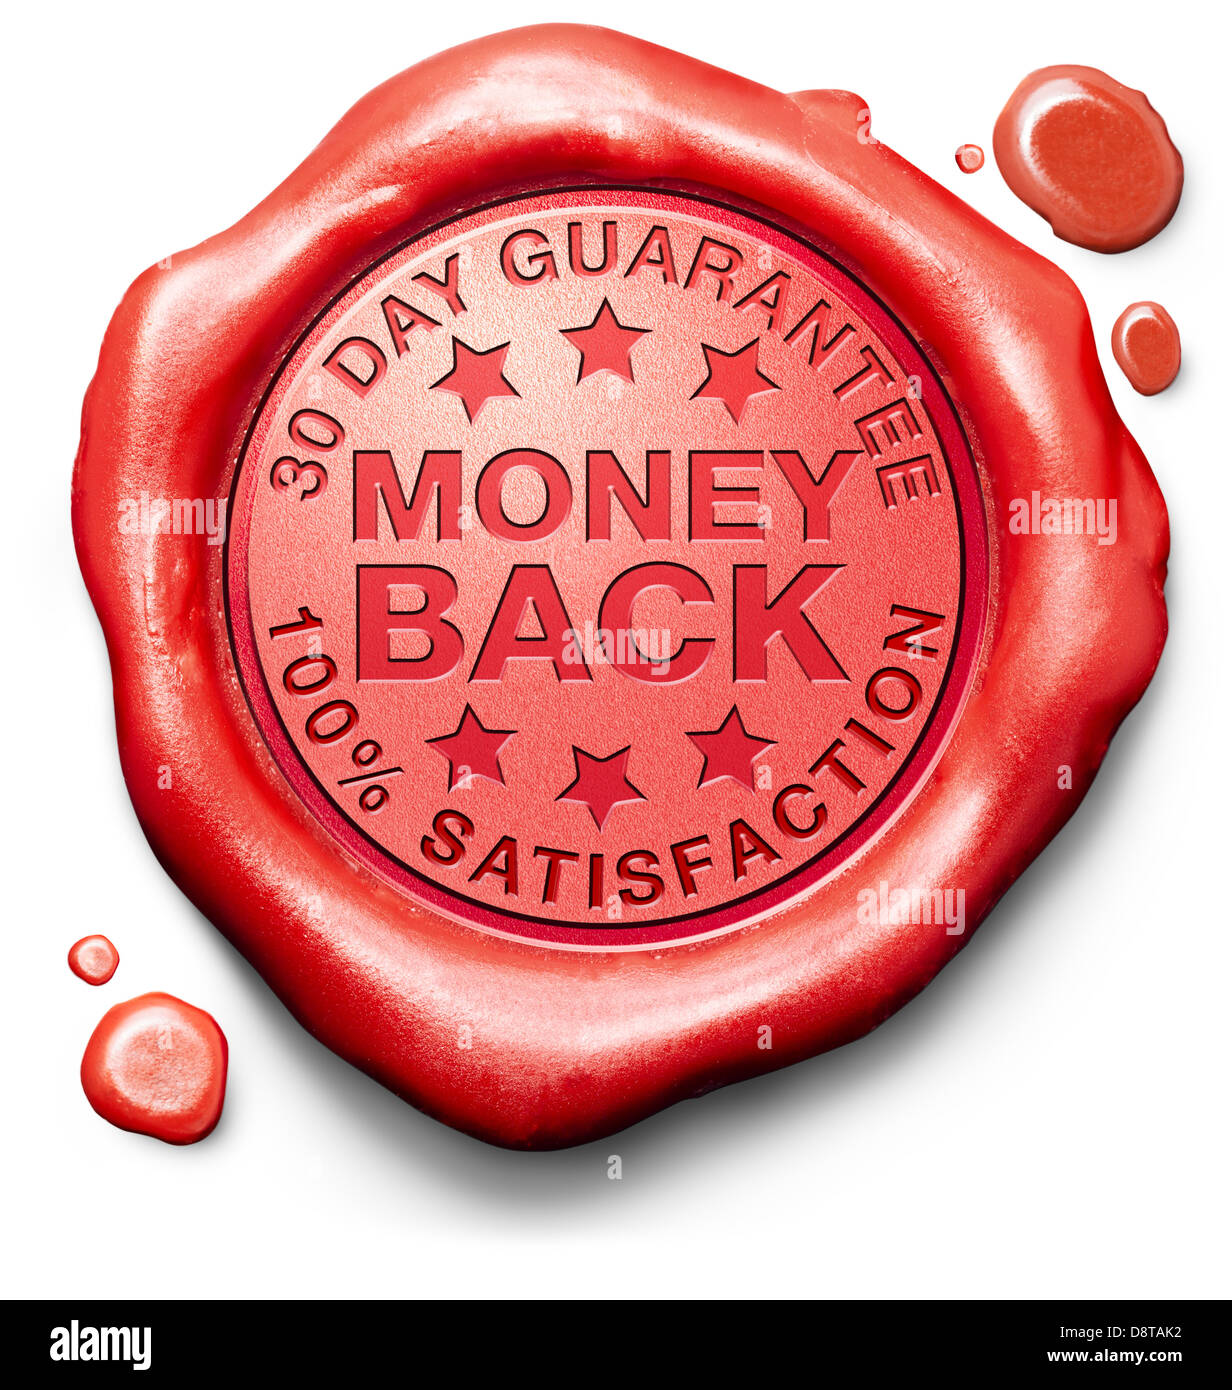 money back 30 day 100% guarantee red wax seal stamp icon product quality label Stock Photo